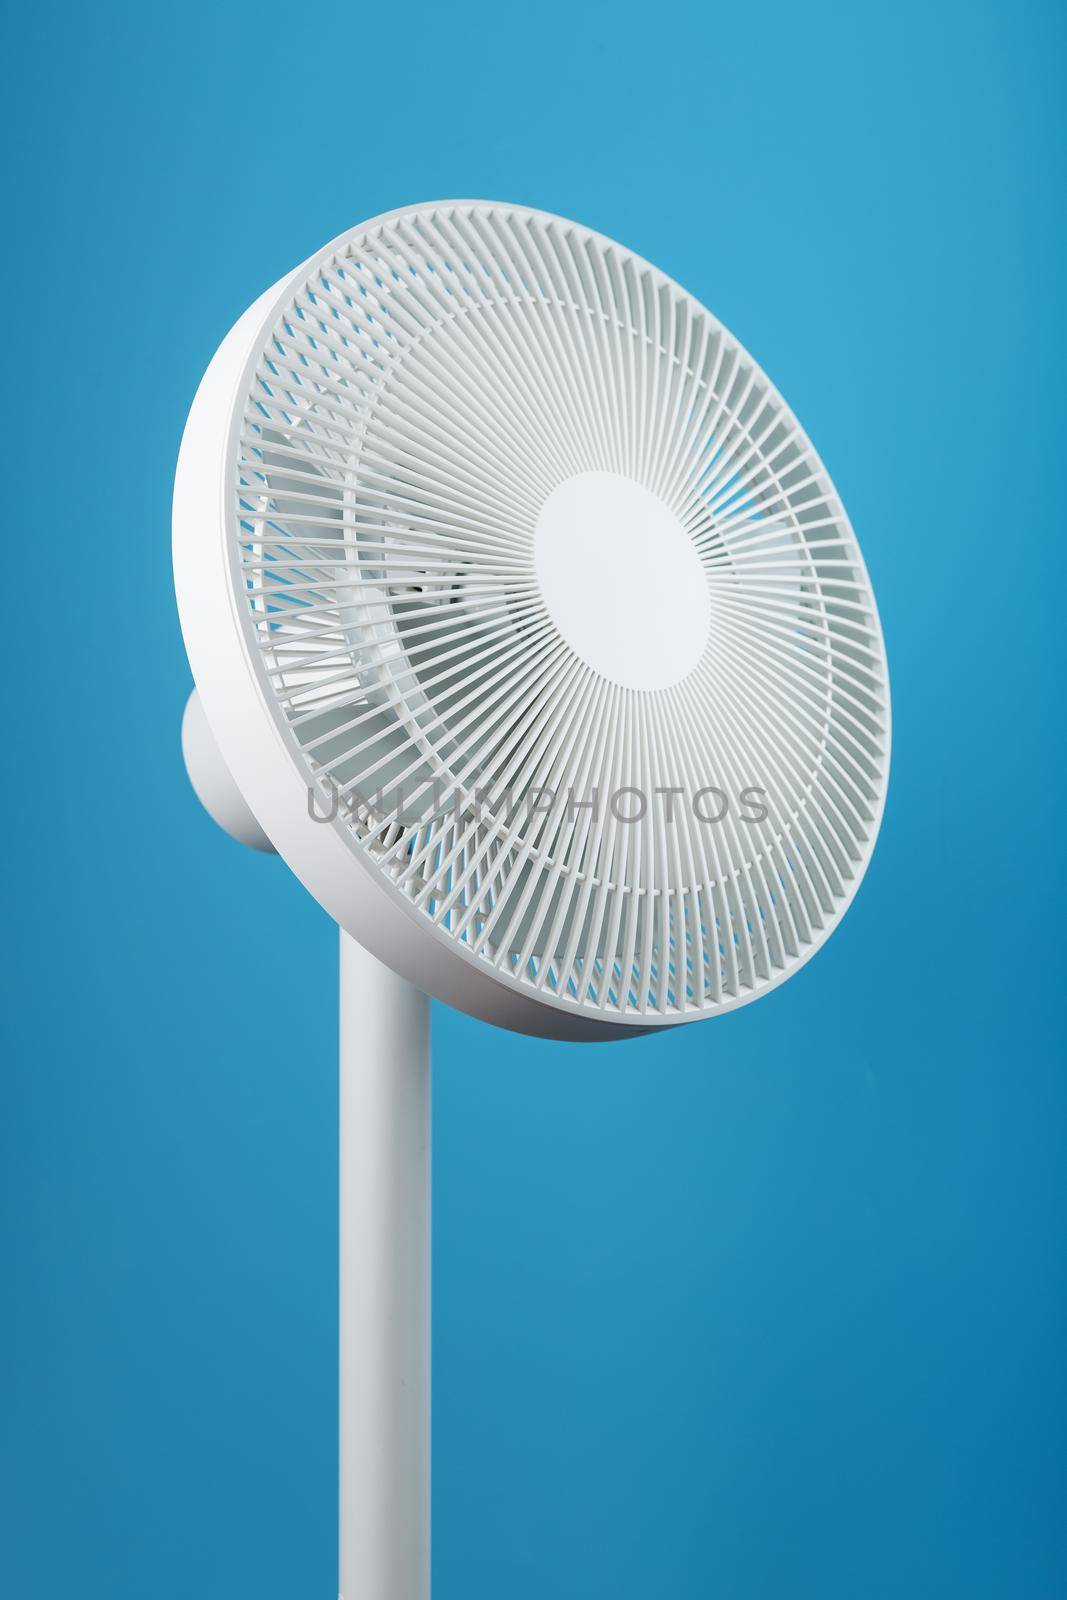 A high-tech white electric fan with a modern design for cooling the room on a blue background by AlexGrec